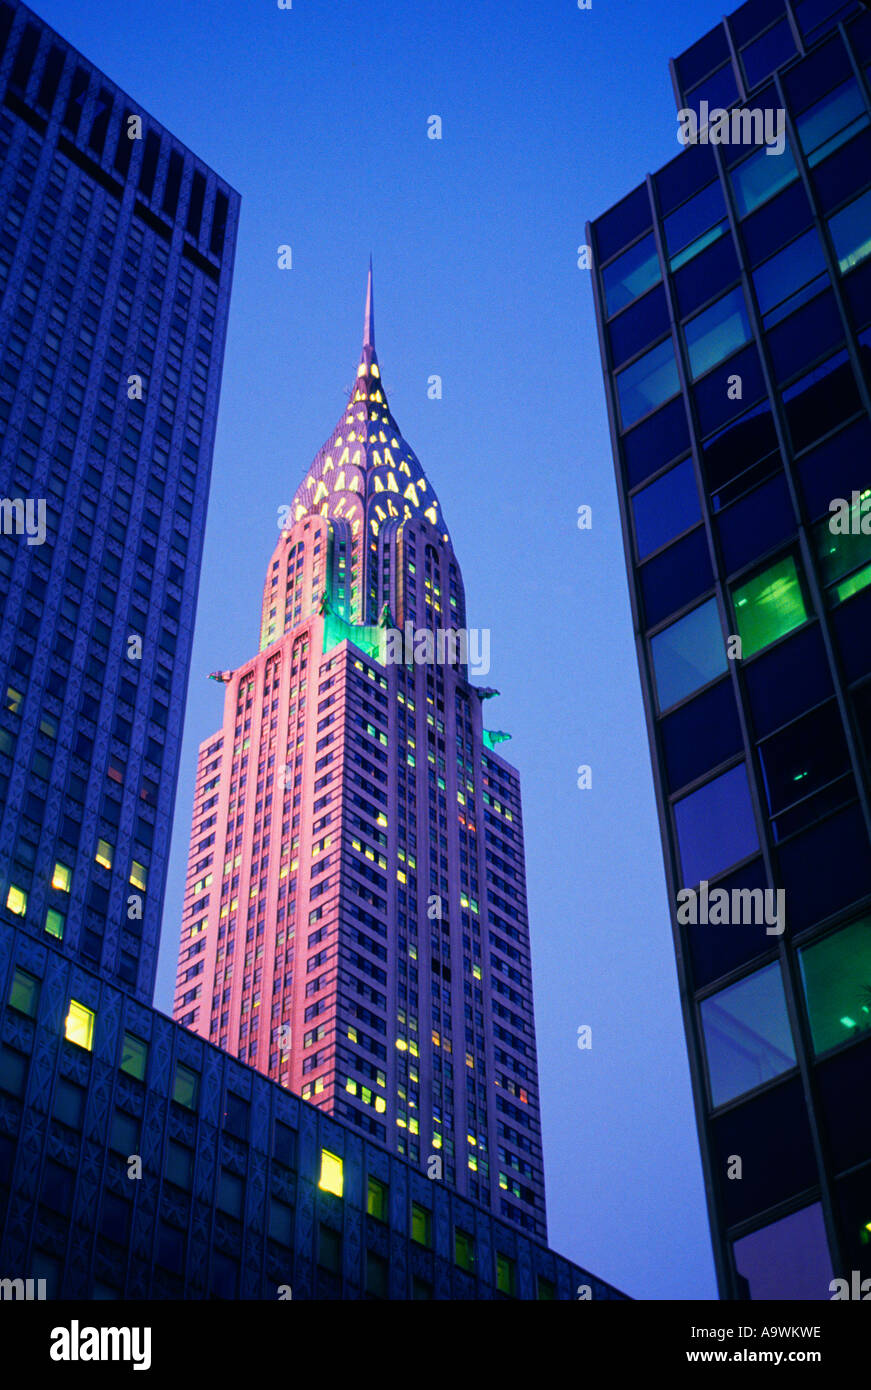 The Chrysler Building, New York City, seen from the street, illuminated at twilight. Art Deco architecture in Midtown Manhattan office building. USA Stock Photo